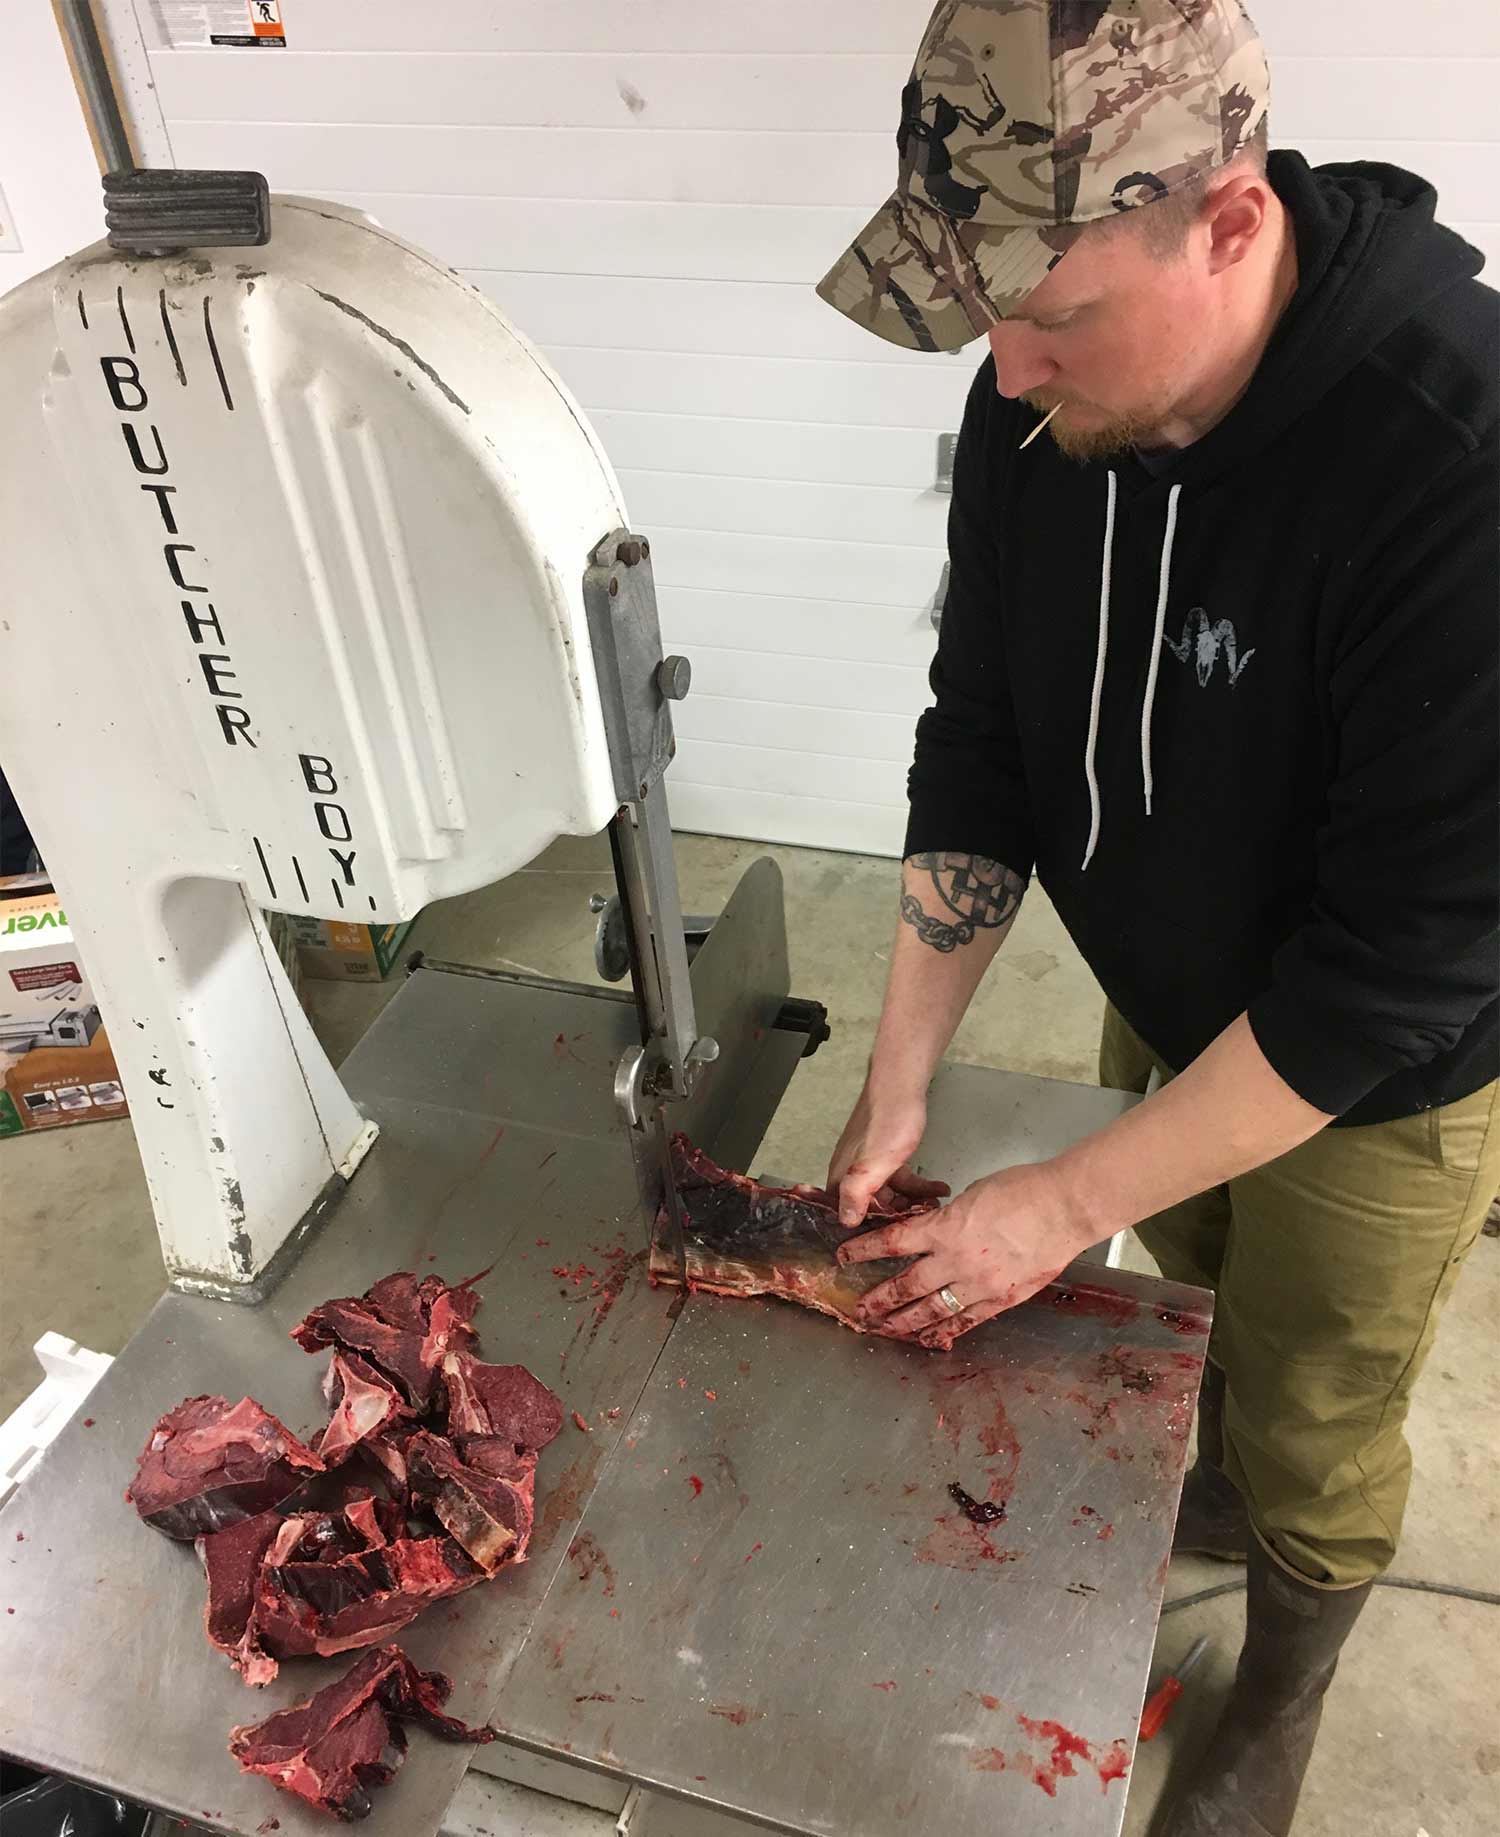 Tyler Freel processing caribou meat after a hunt.